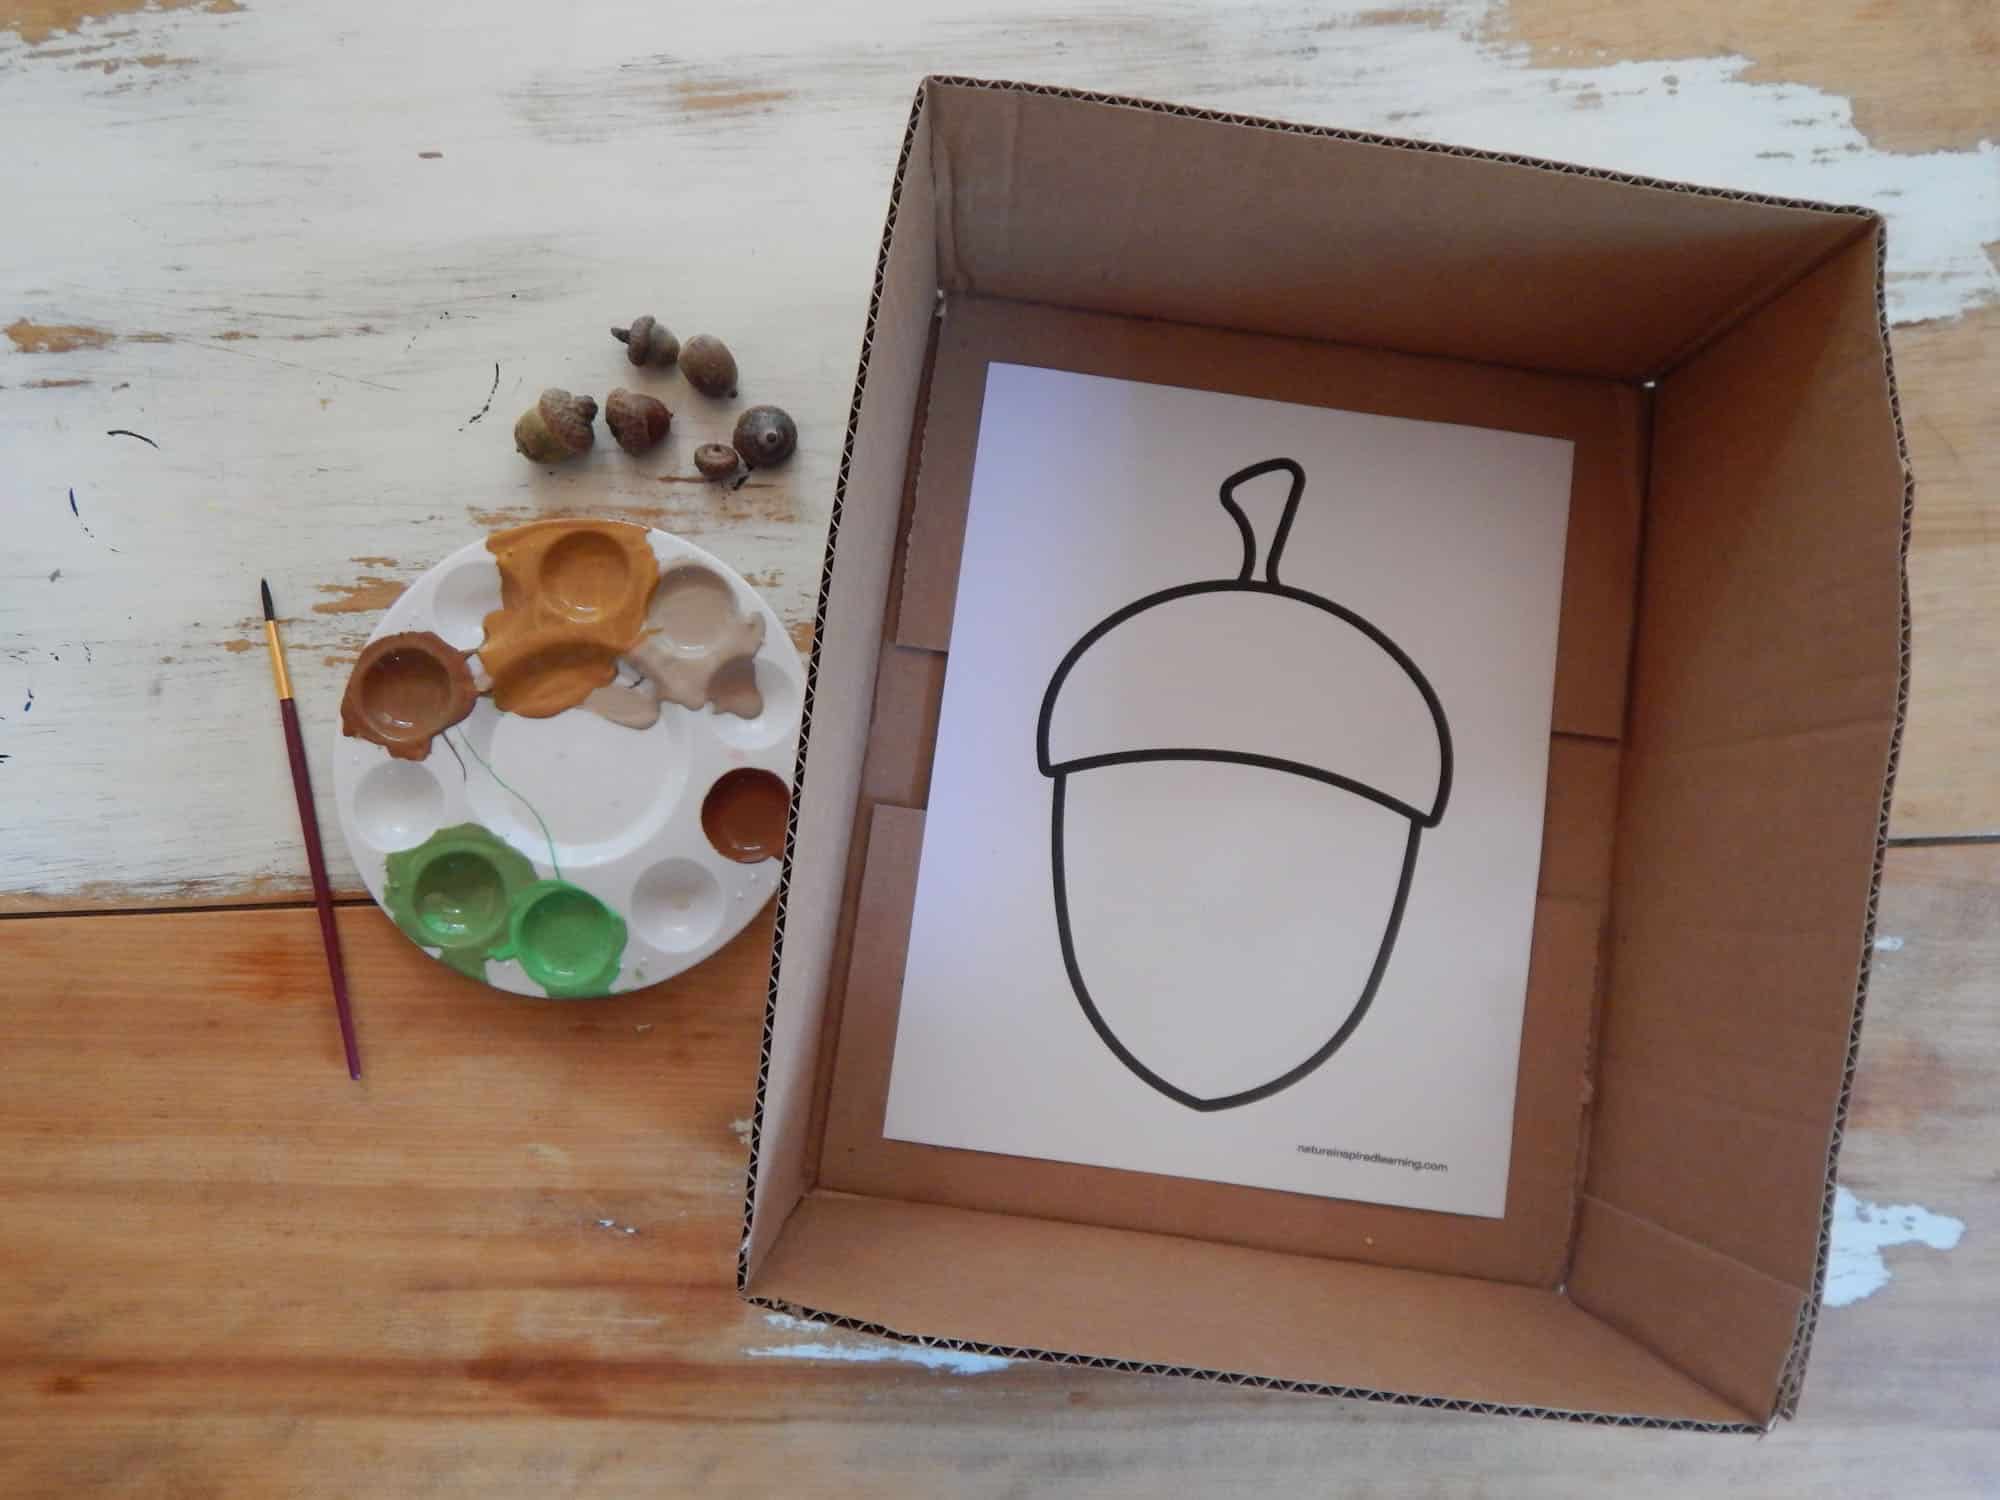 a cut cardboard box with an acorn template inside on a wooden table with a plastic paint tray with orange, tan, brown, and green paint a paint brush, and six real acorns